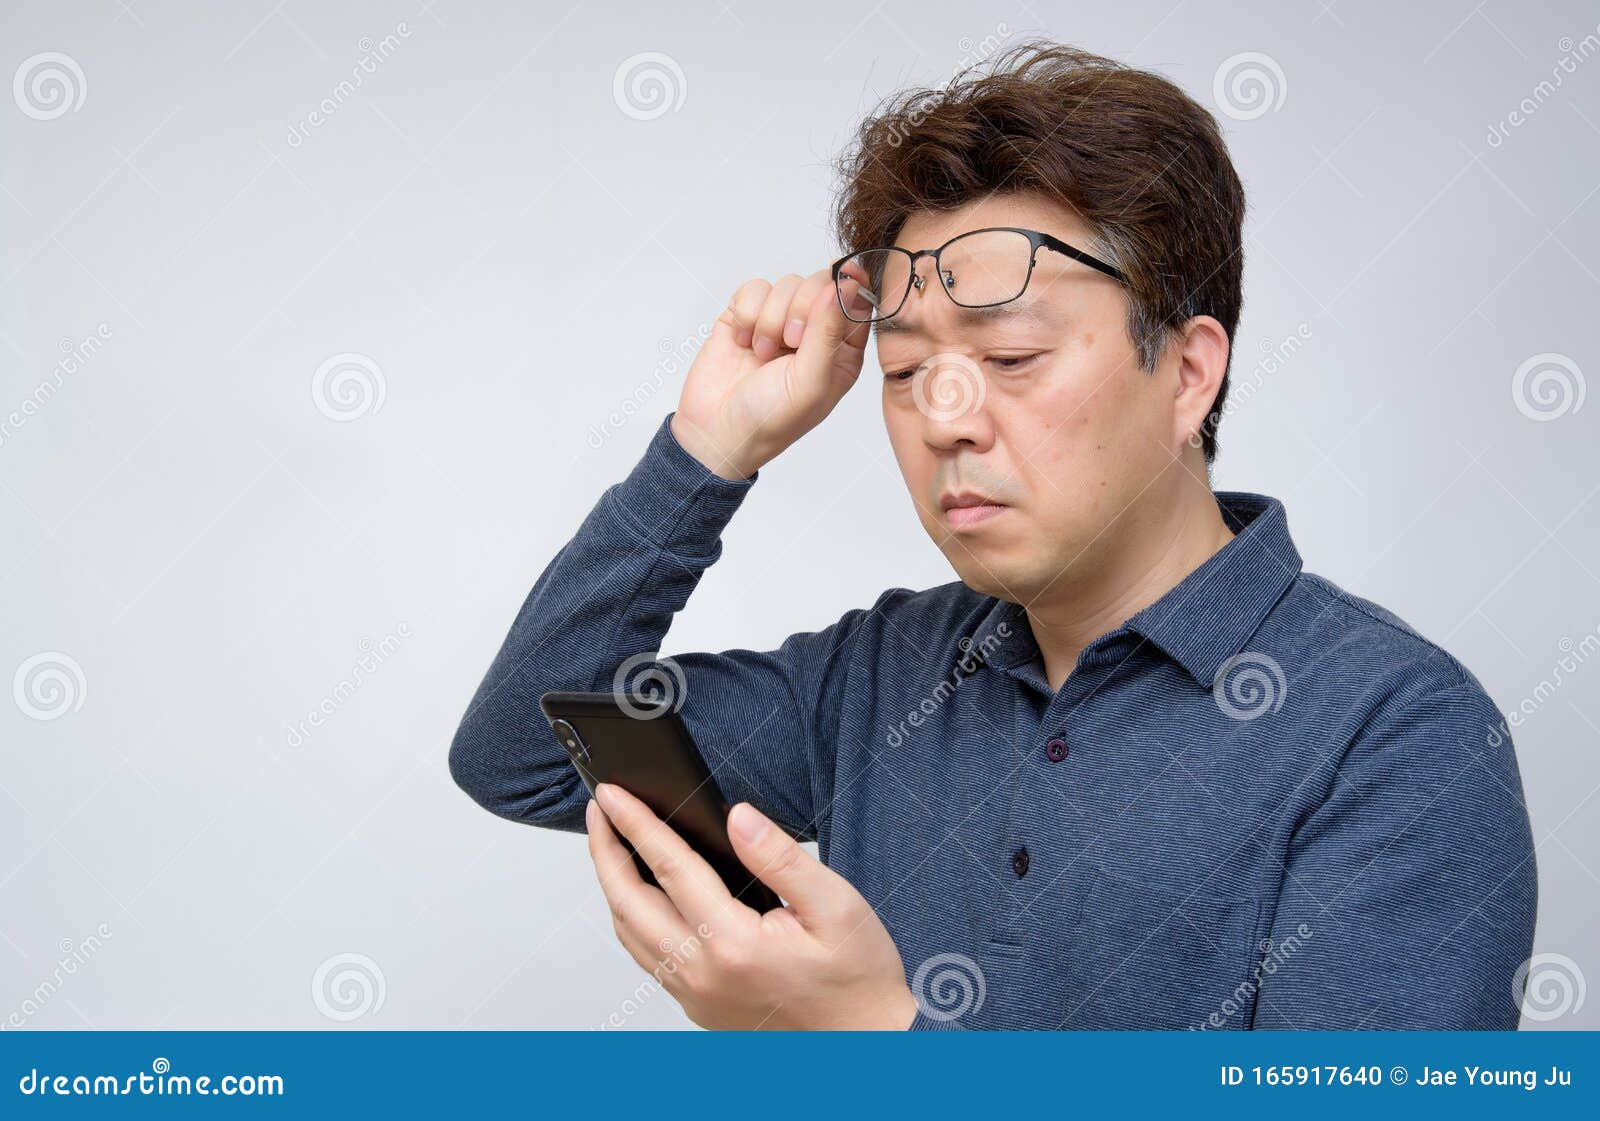 asian male trying to read something on his mobile phone. poor sight, presbyopia, myopia.